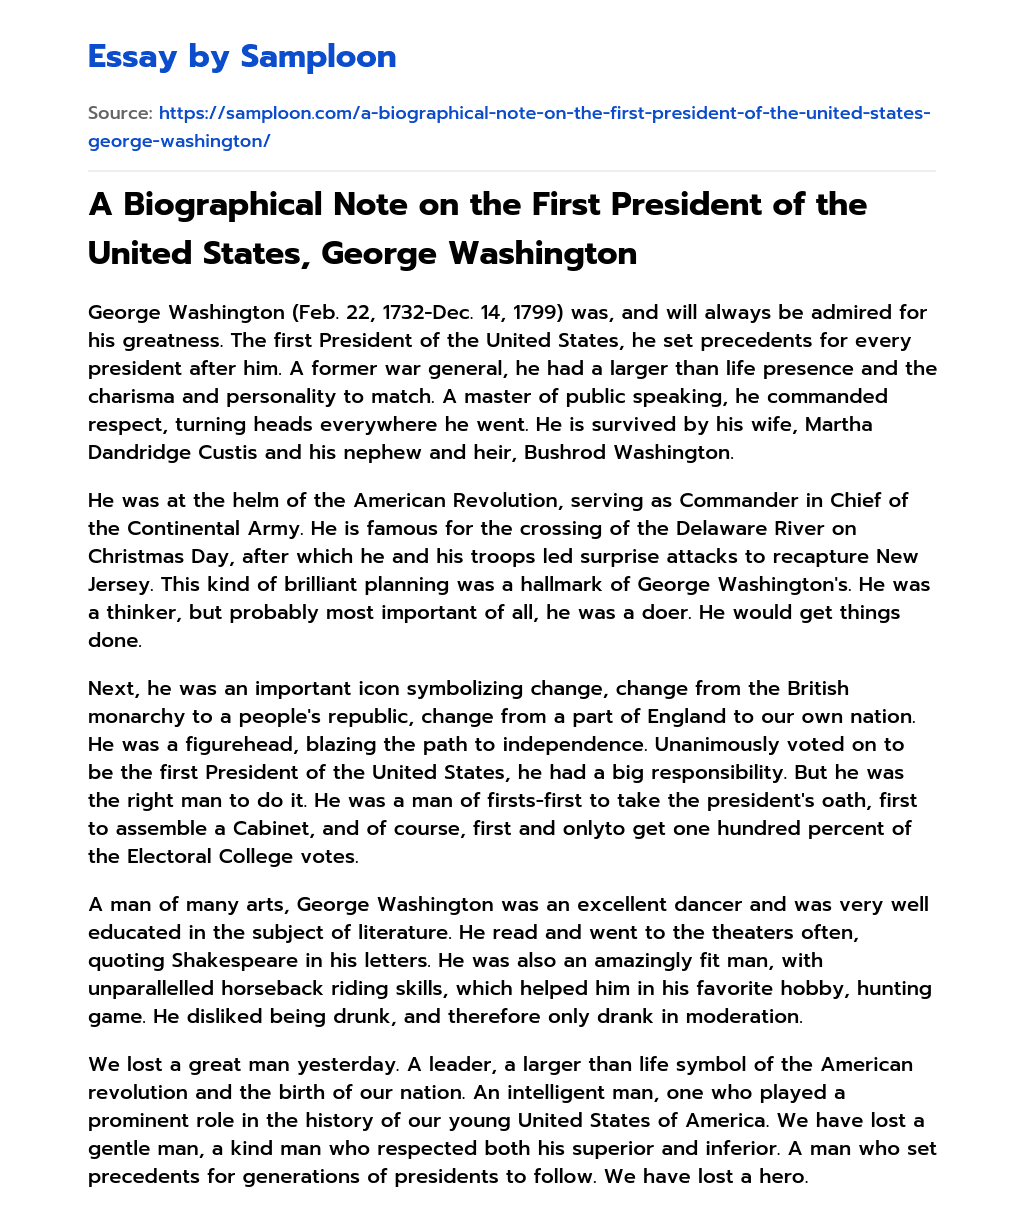 A Biographical Note on the First President of the United States, George Washington essay